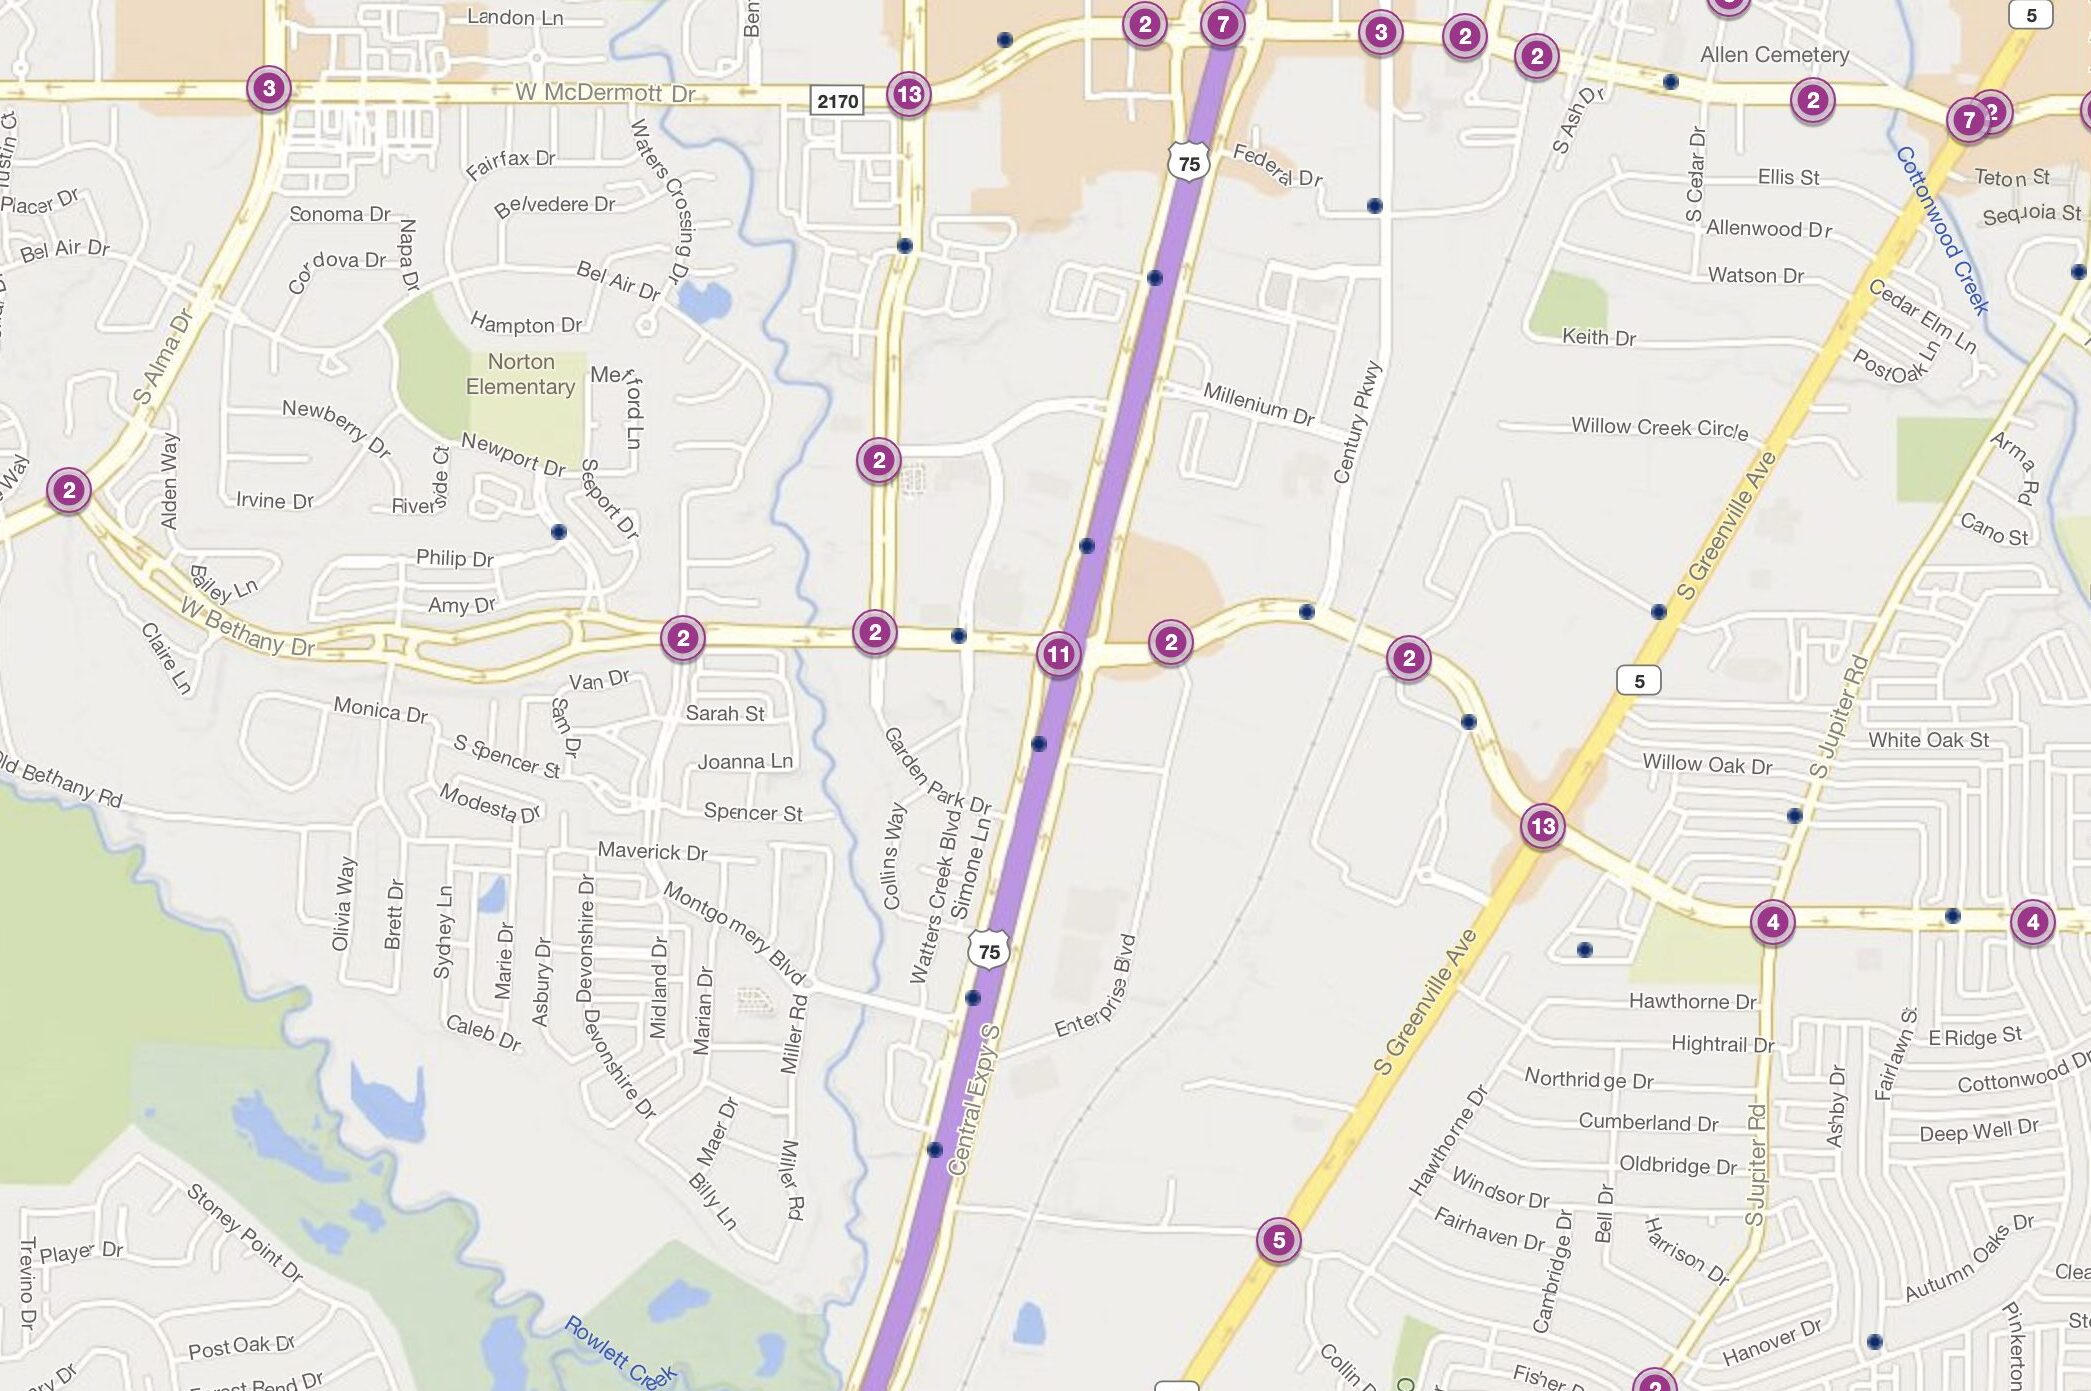 Cluster Map of 2023 Car Accidents at US 75 (Central Expressway) & Bethany Dr. (TXDOT)